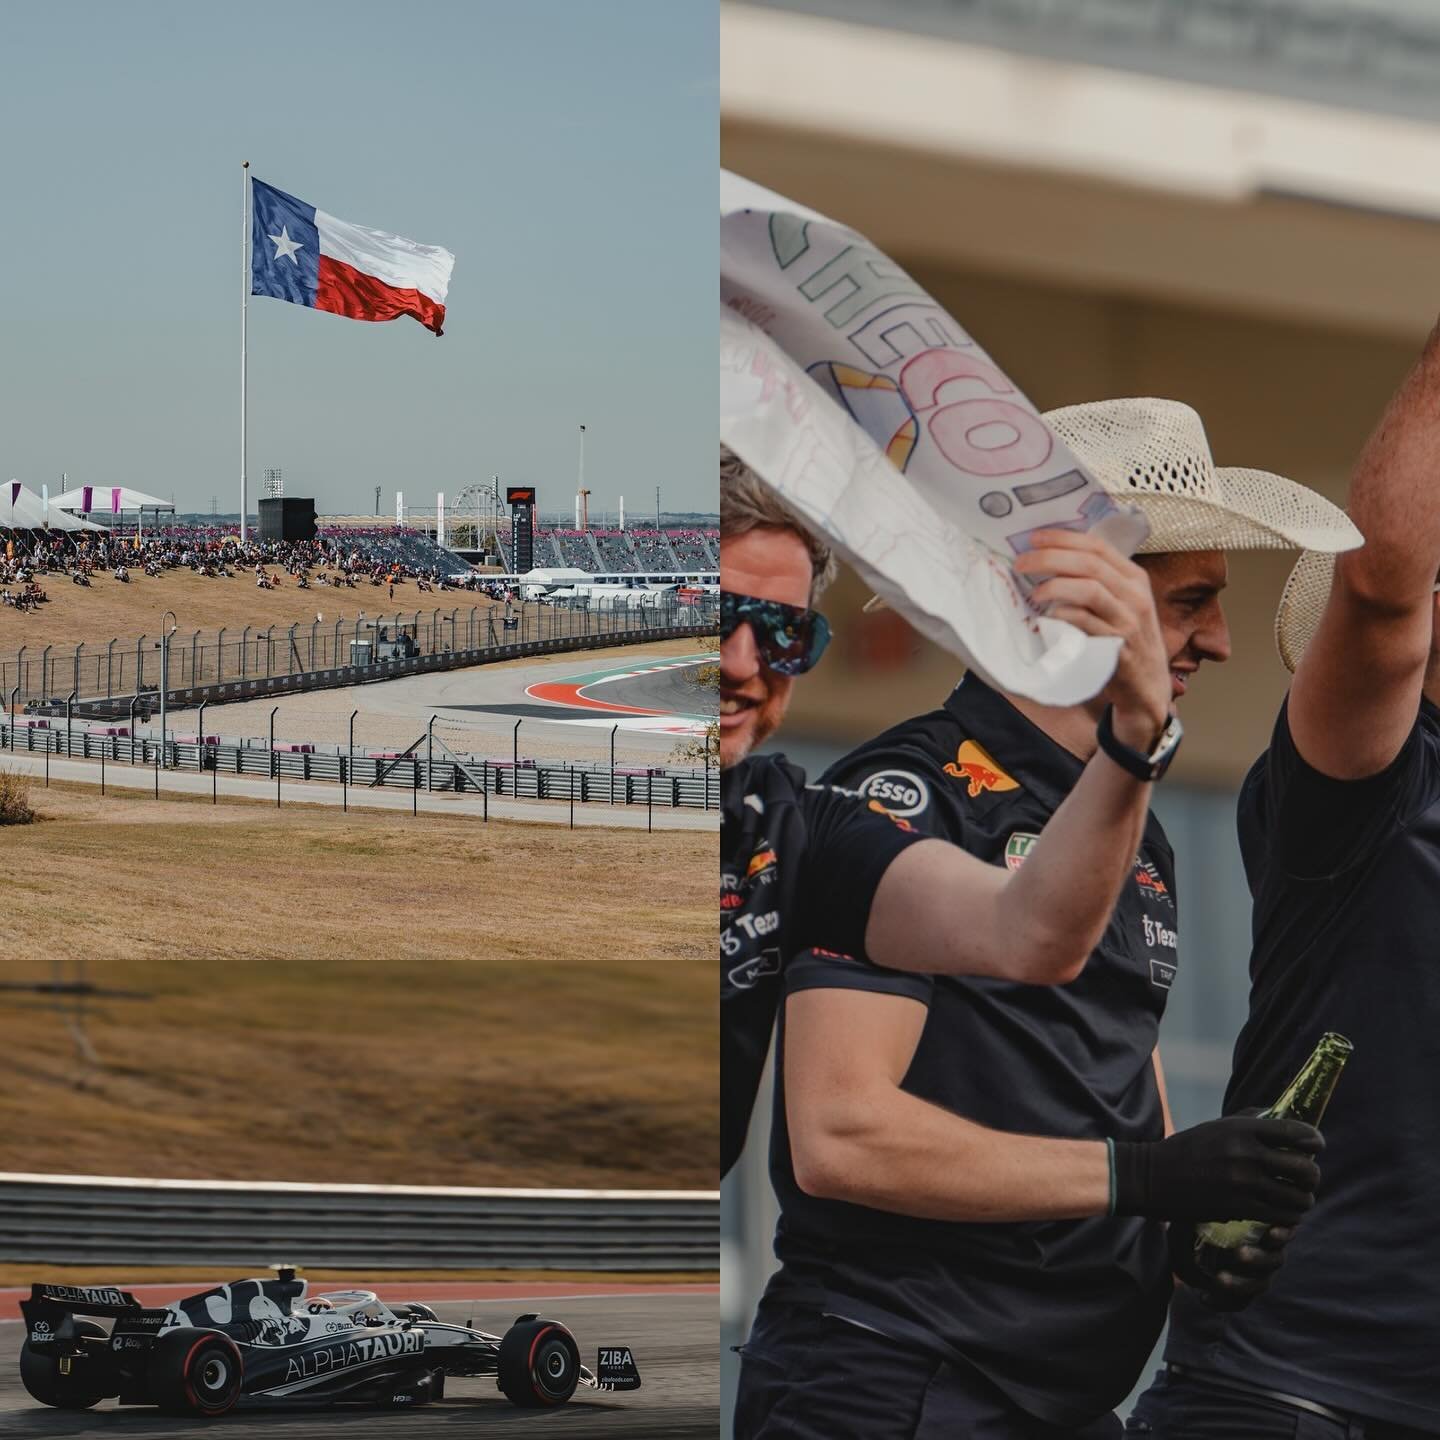 Posting some photos from a few years ago. Good times at Circuit of the Americas to see the Bulls capturing the Drivers' championship for @maxverstappen1 

Hoping to go on more trips in the future to see some more F1 racing.